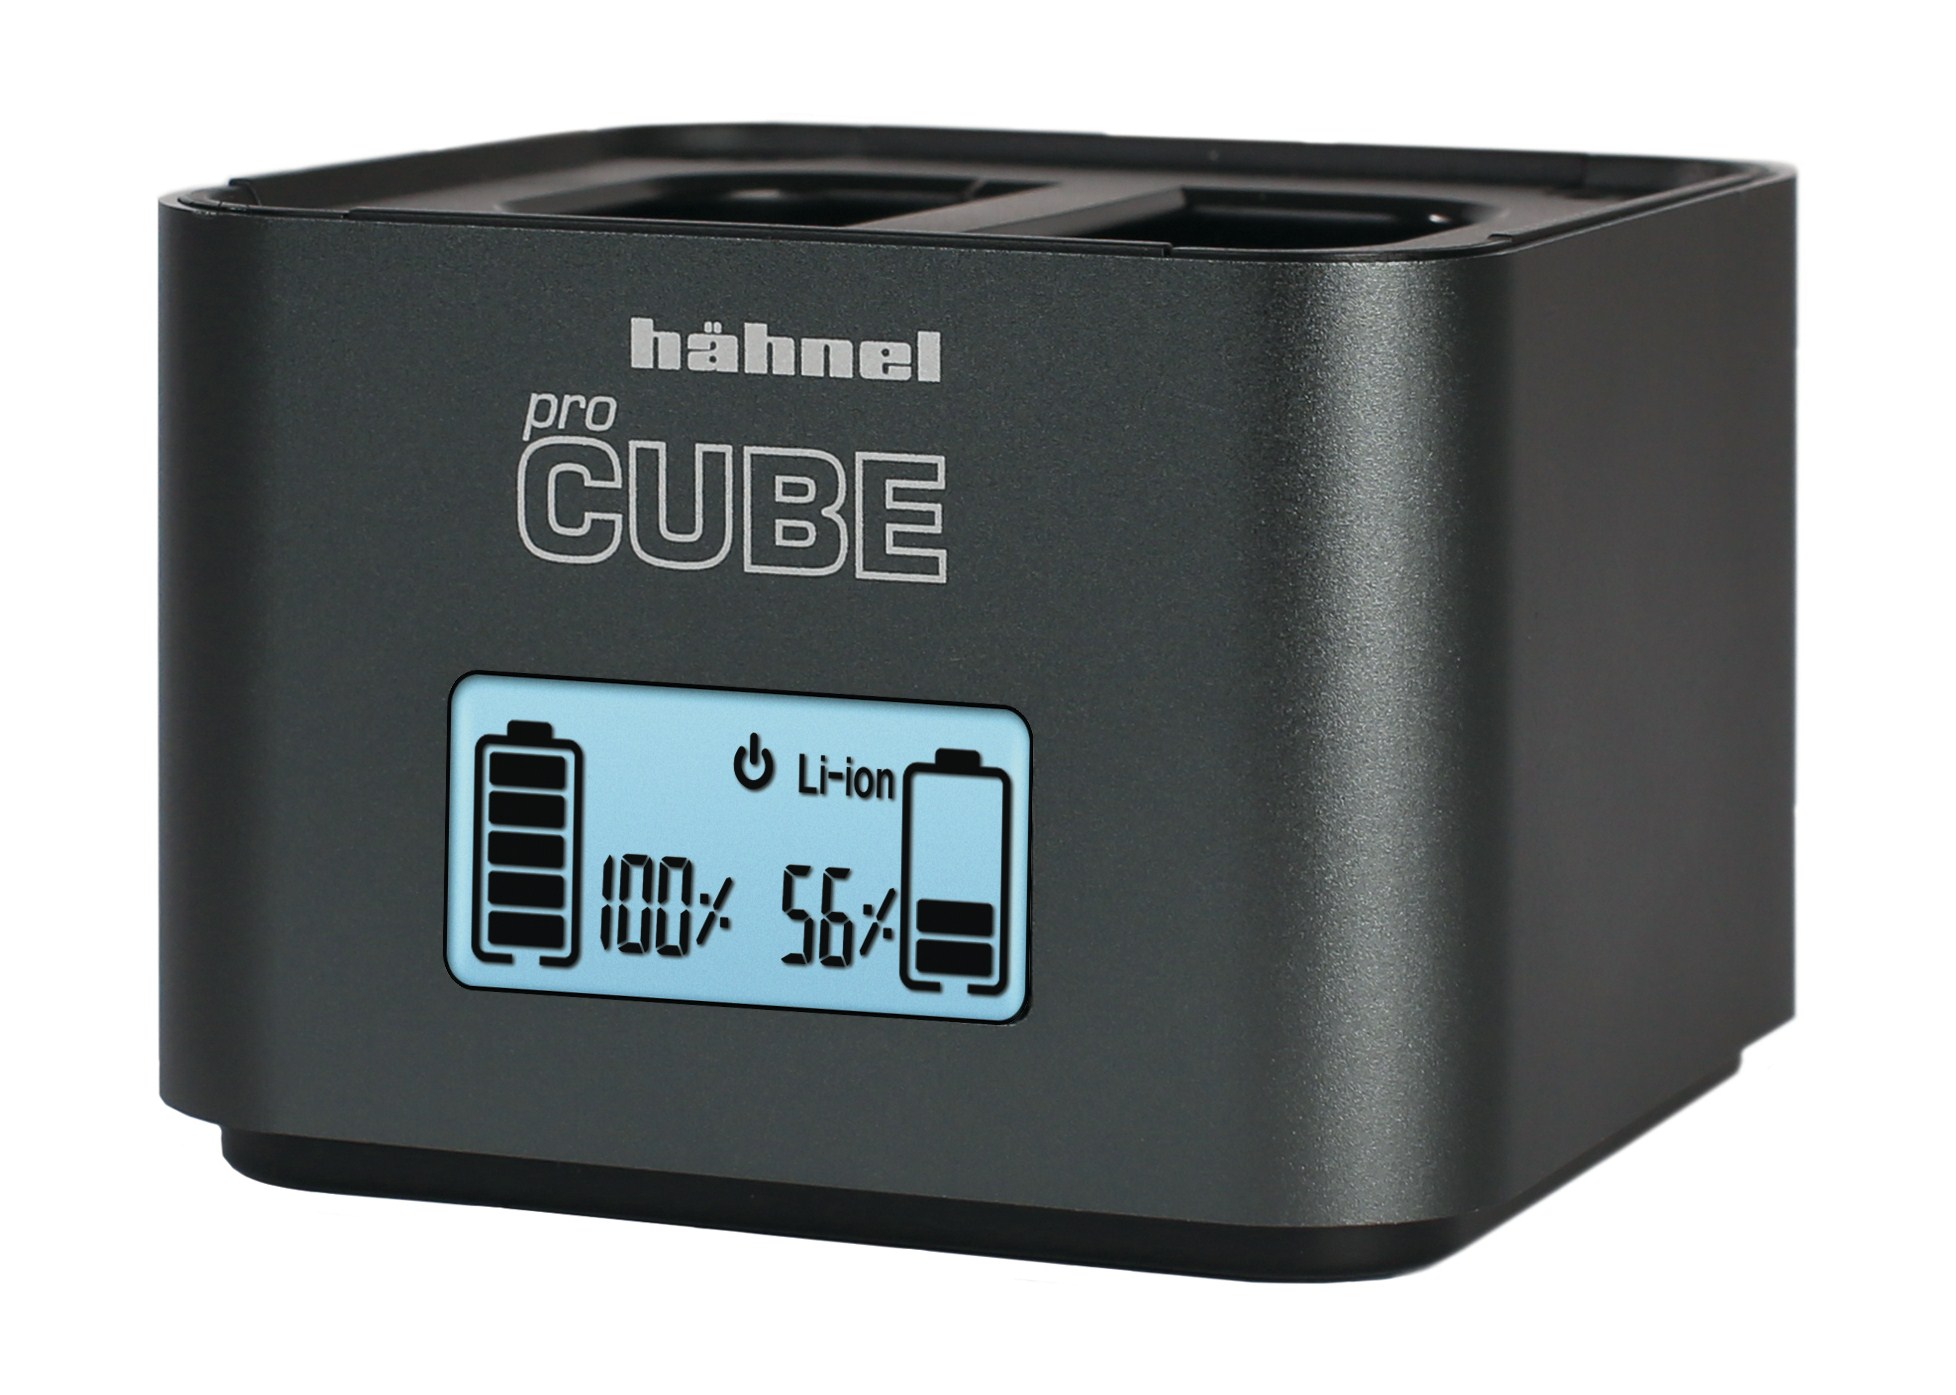 Hahnel ProCube charger